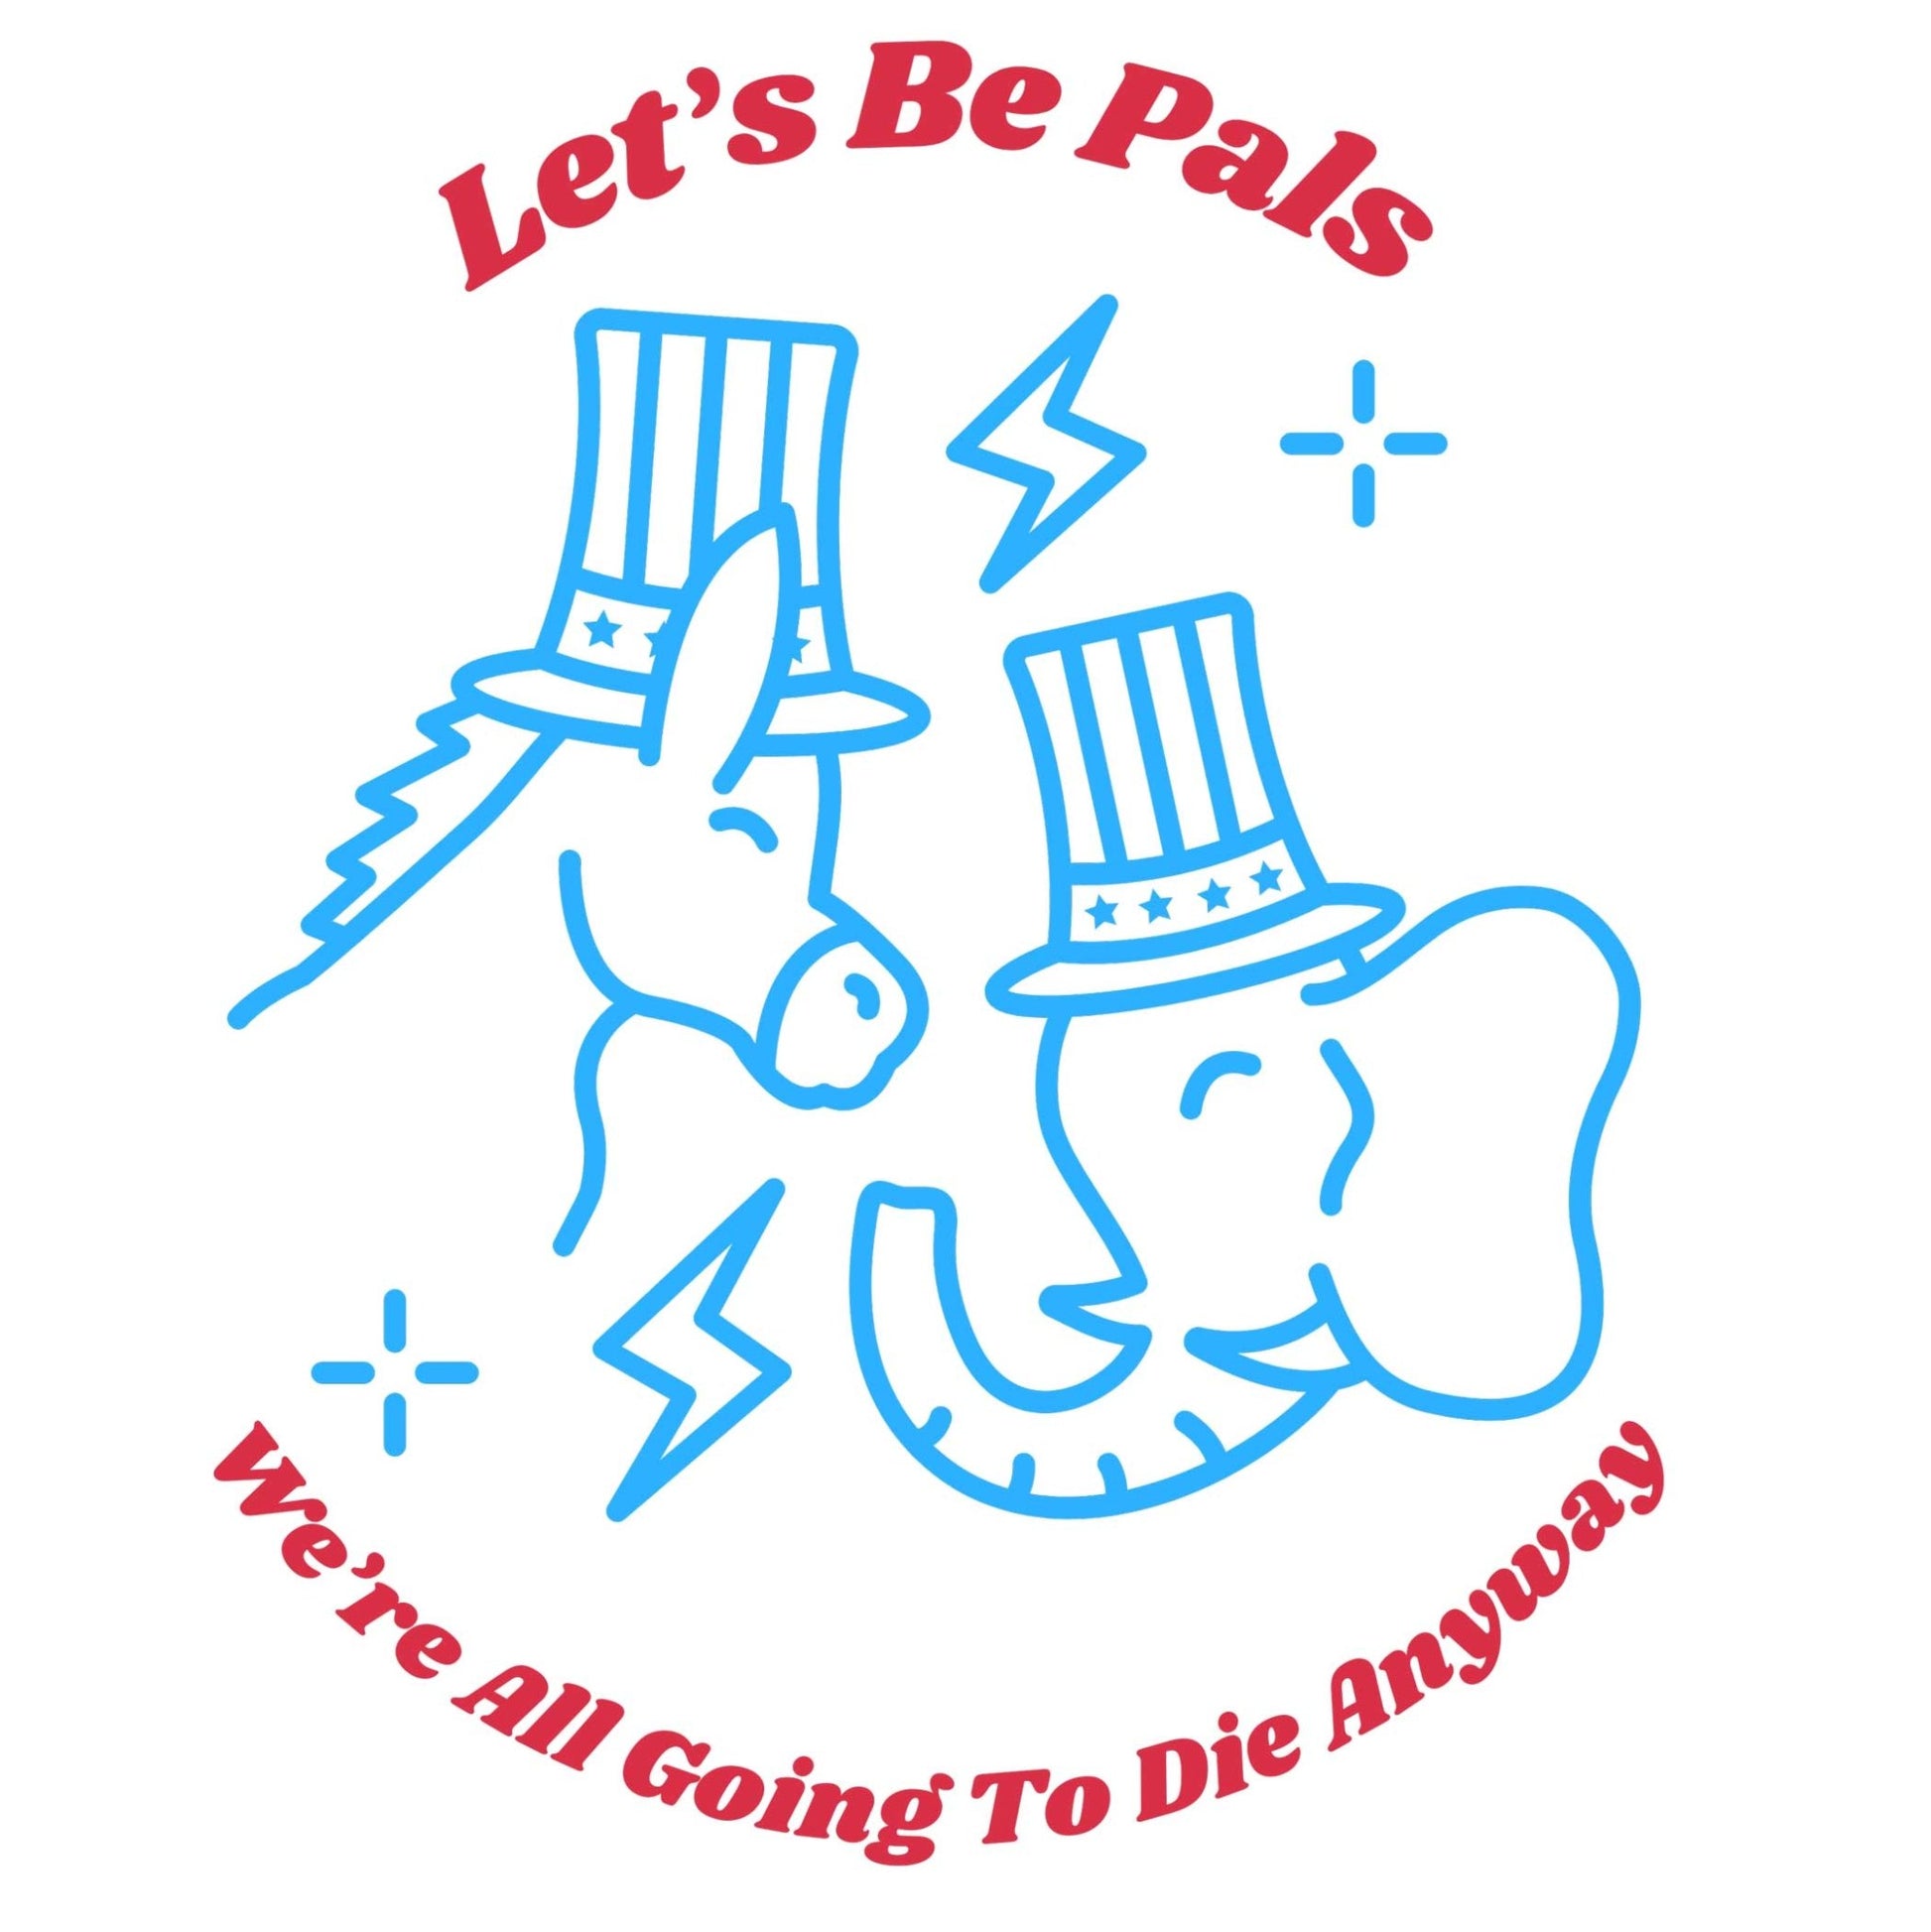 Let's Be Pals We're All Going To Die Anyway Women's Funny Political Bamboo Scoop Neck T Shirt